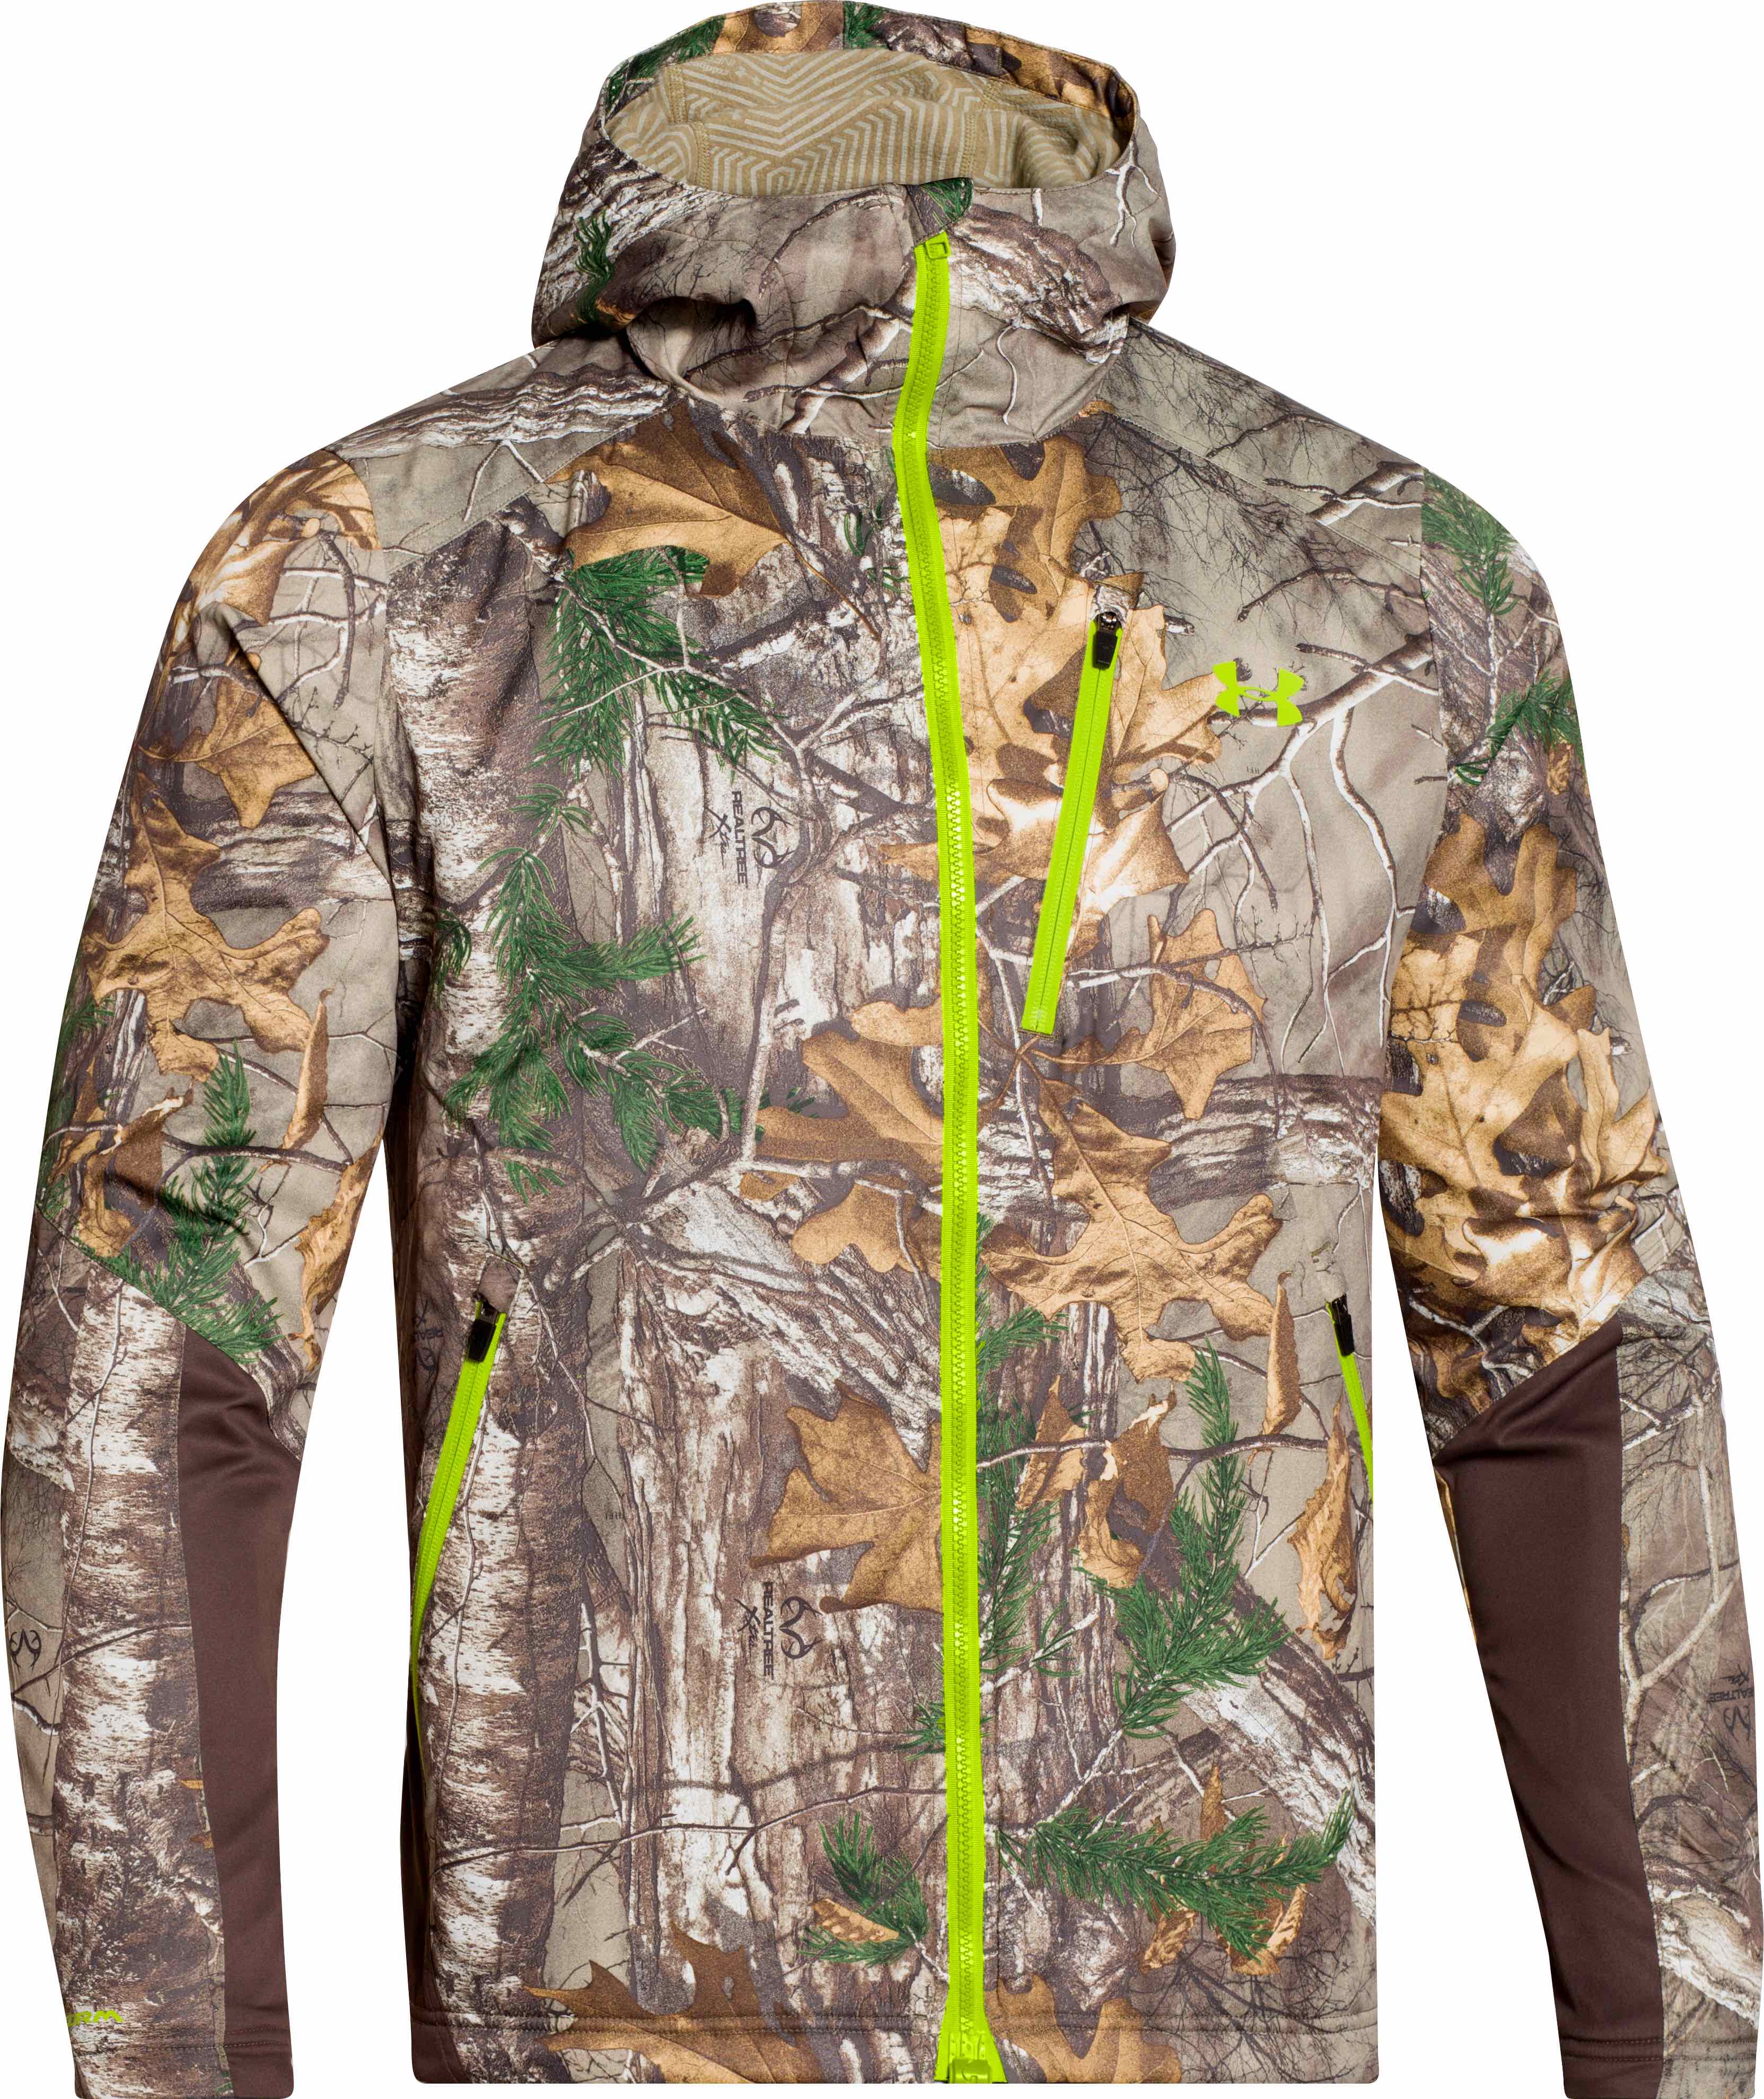 under armour cold gear hunting jacket